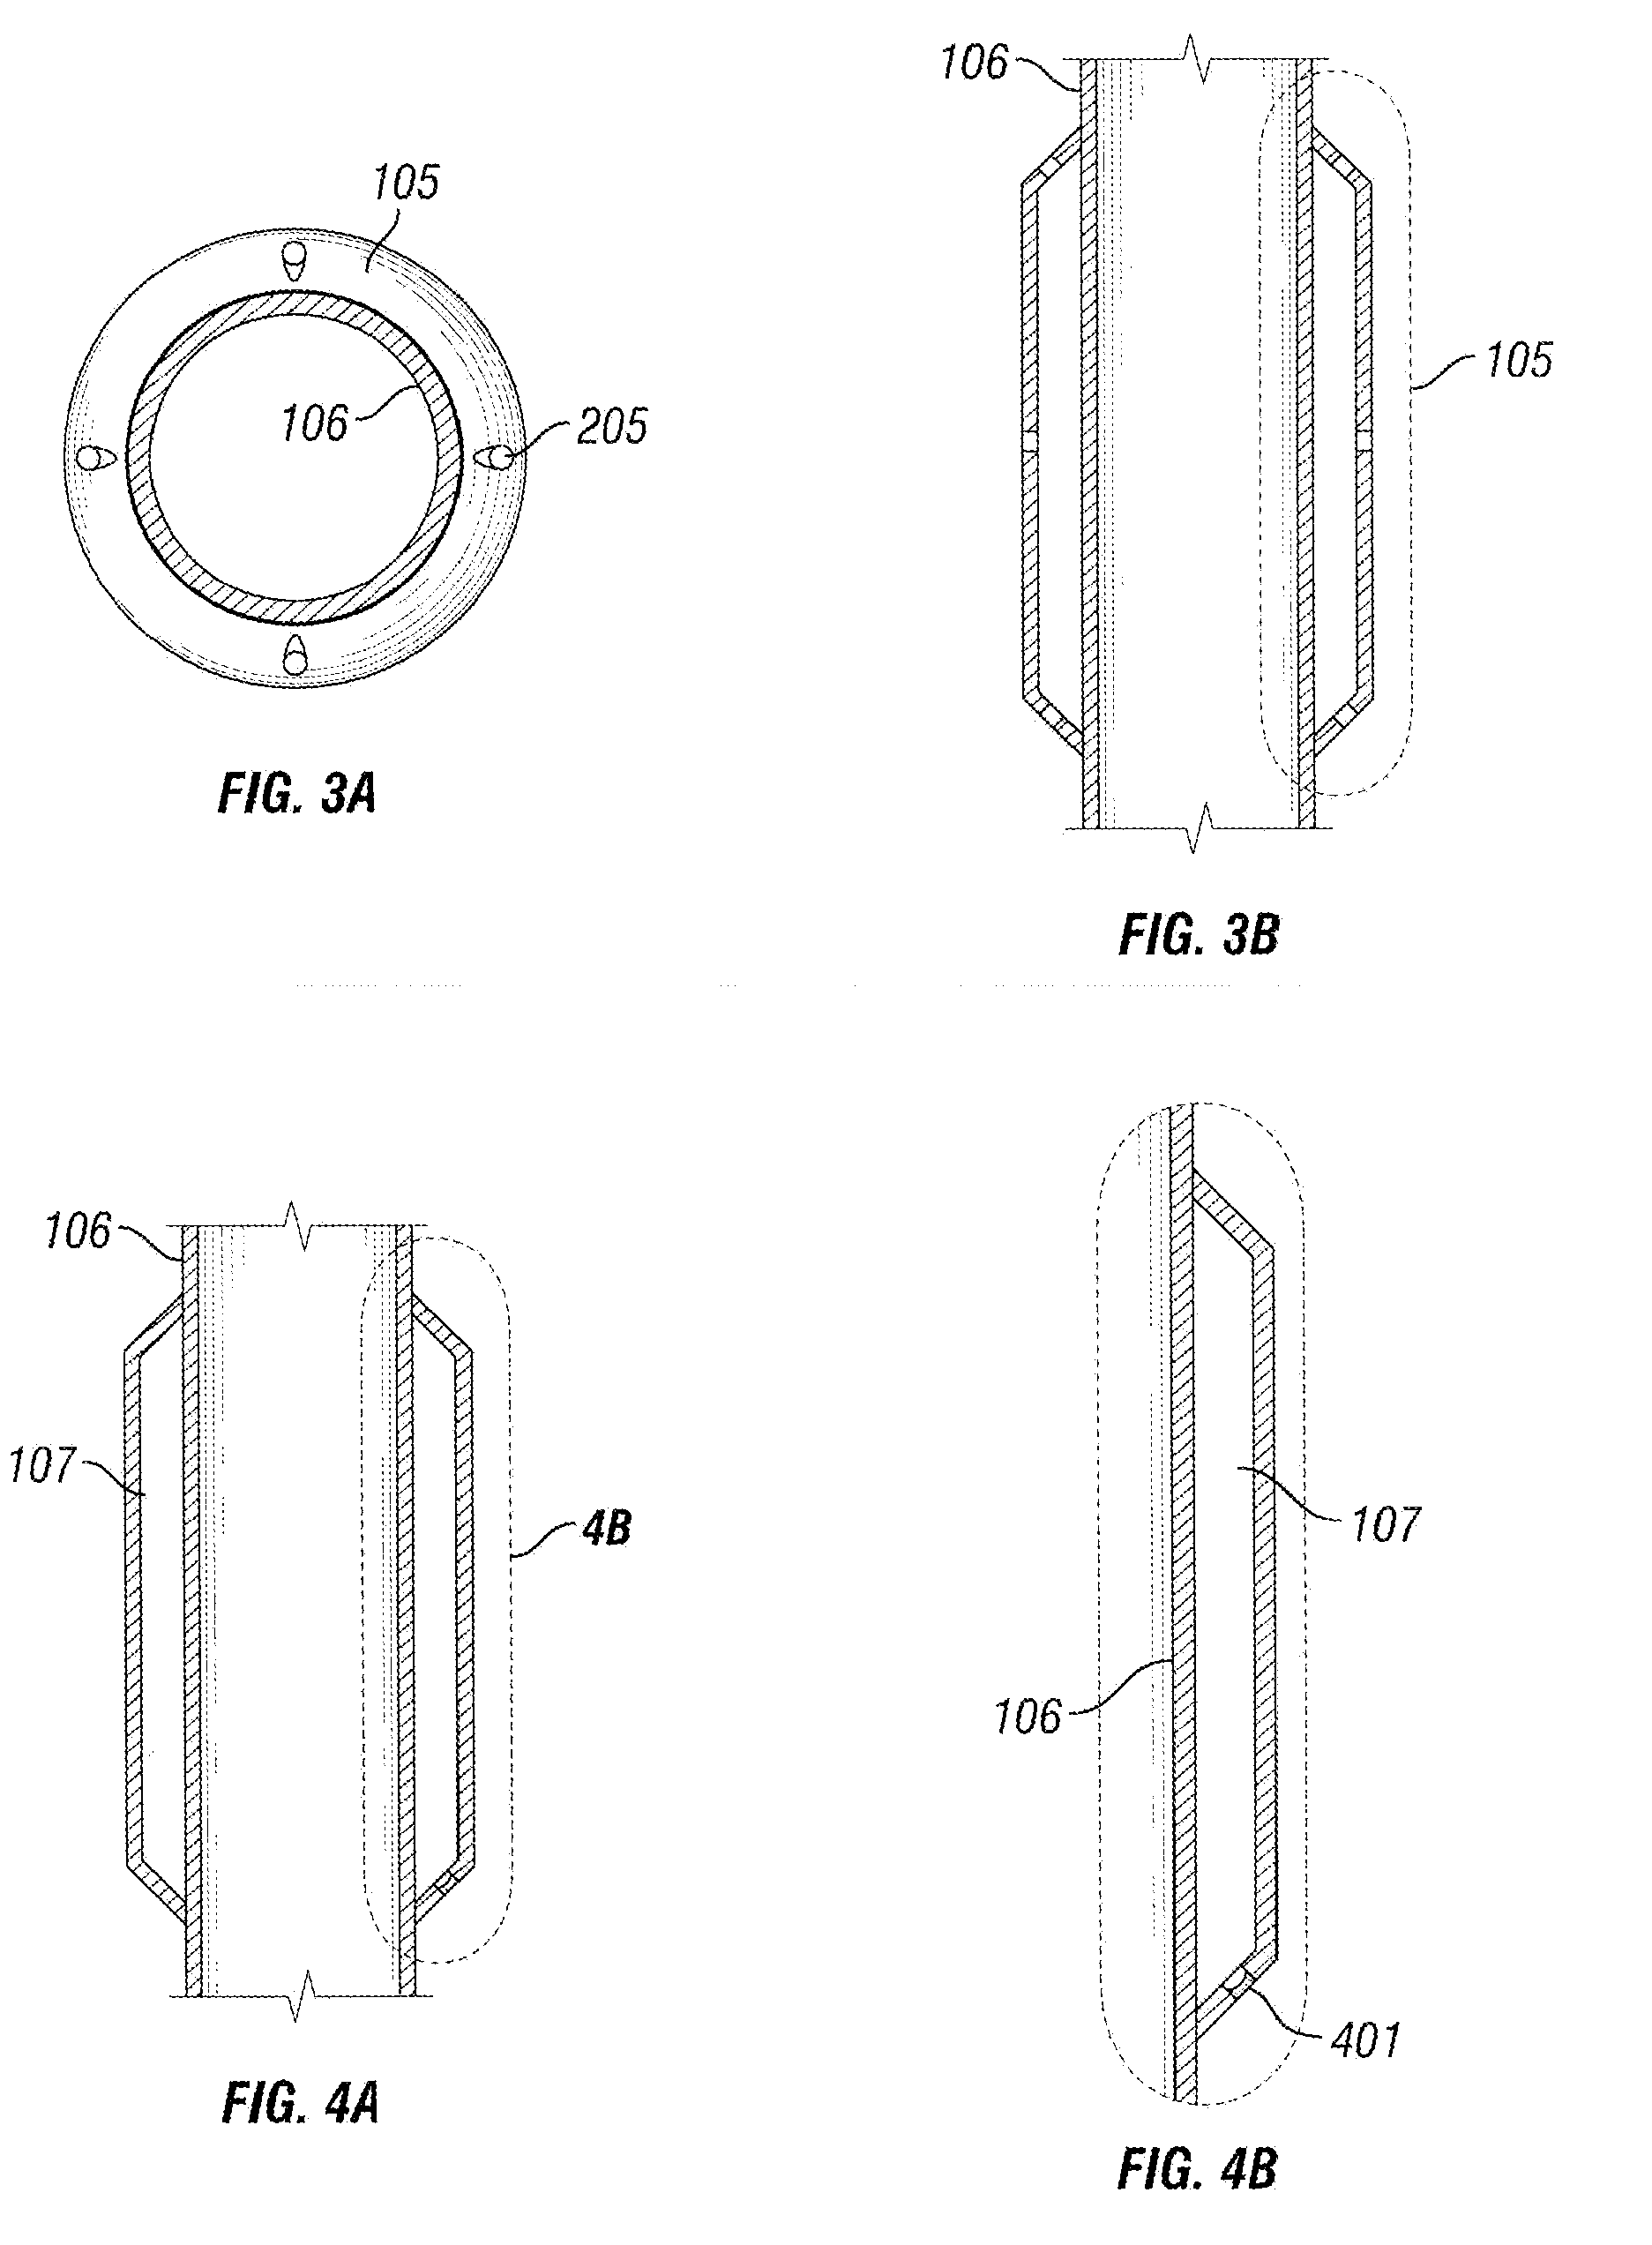 Systems and methods for mitigating annular pressure buildup in an oil or gas well